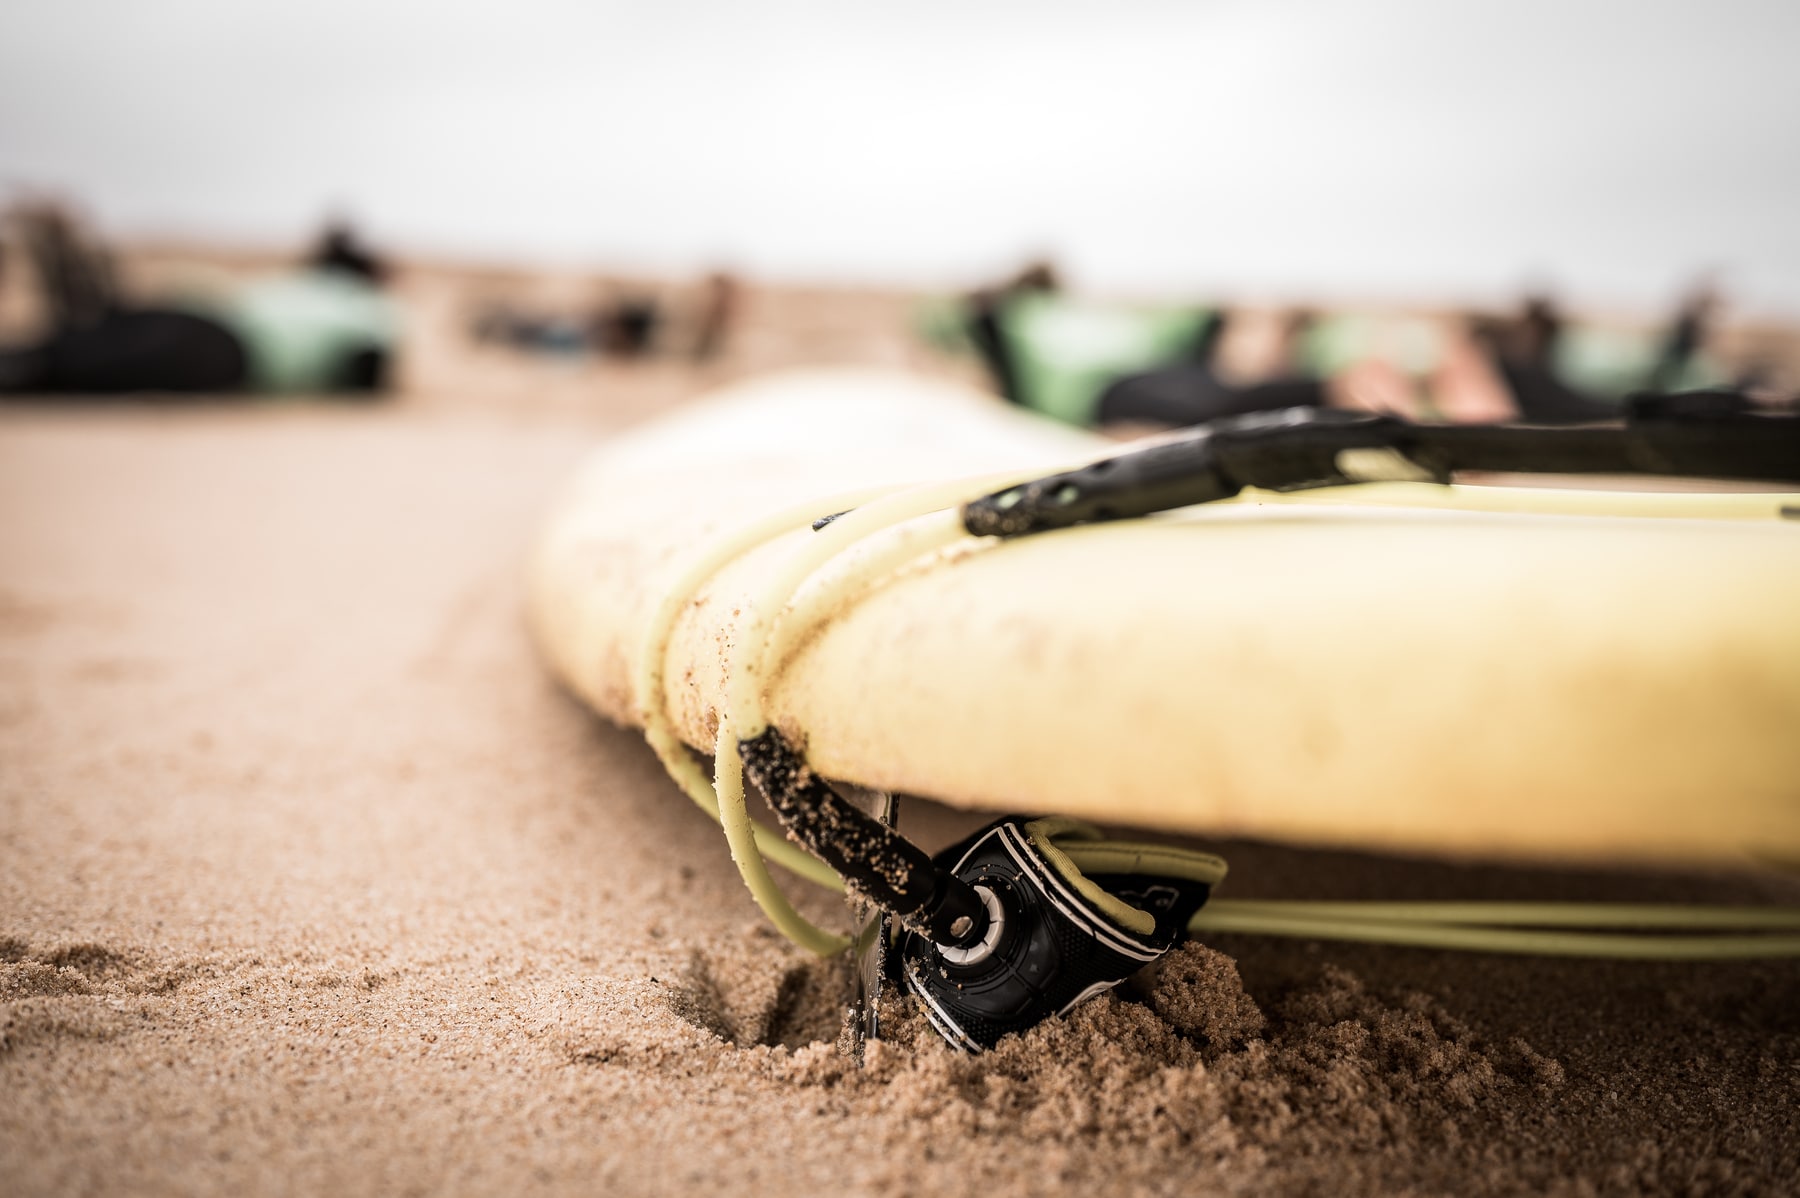 The right moment to change surfboard size